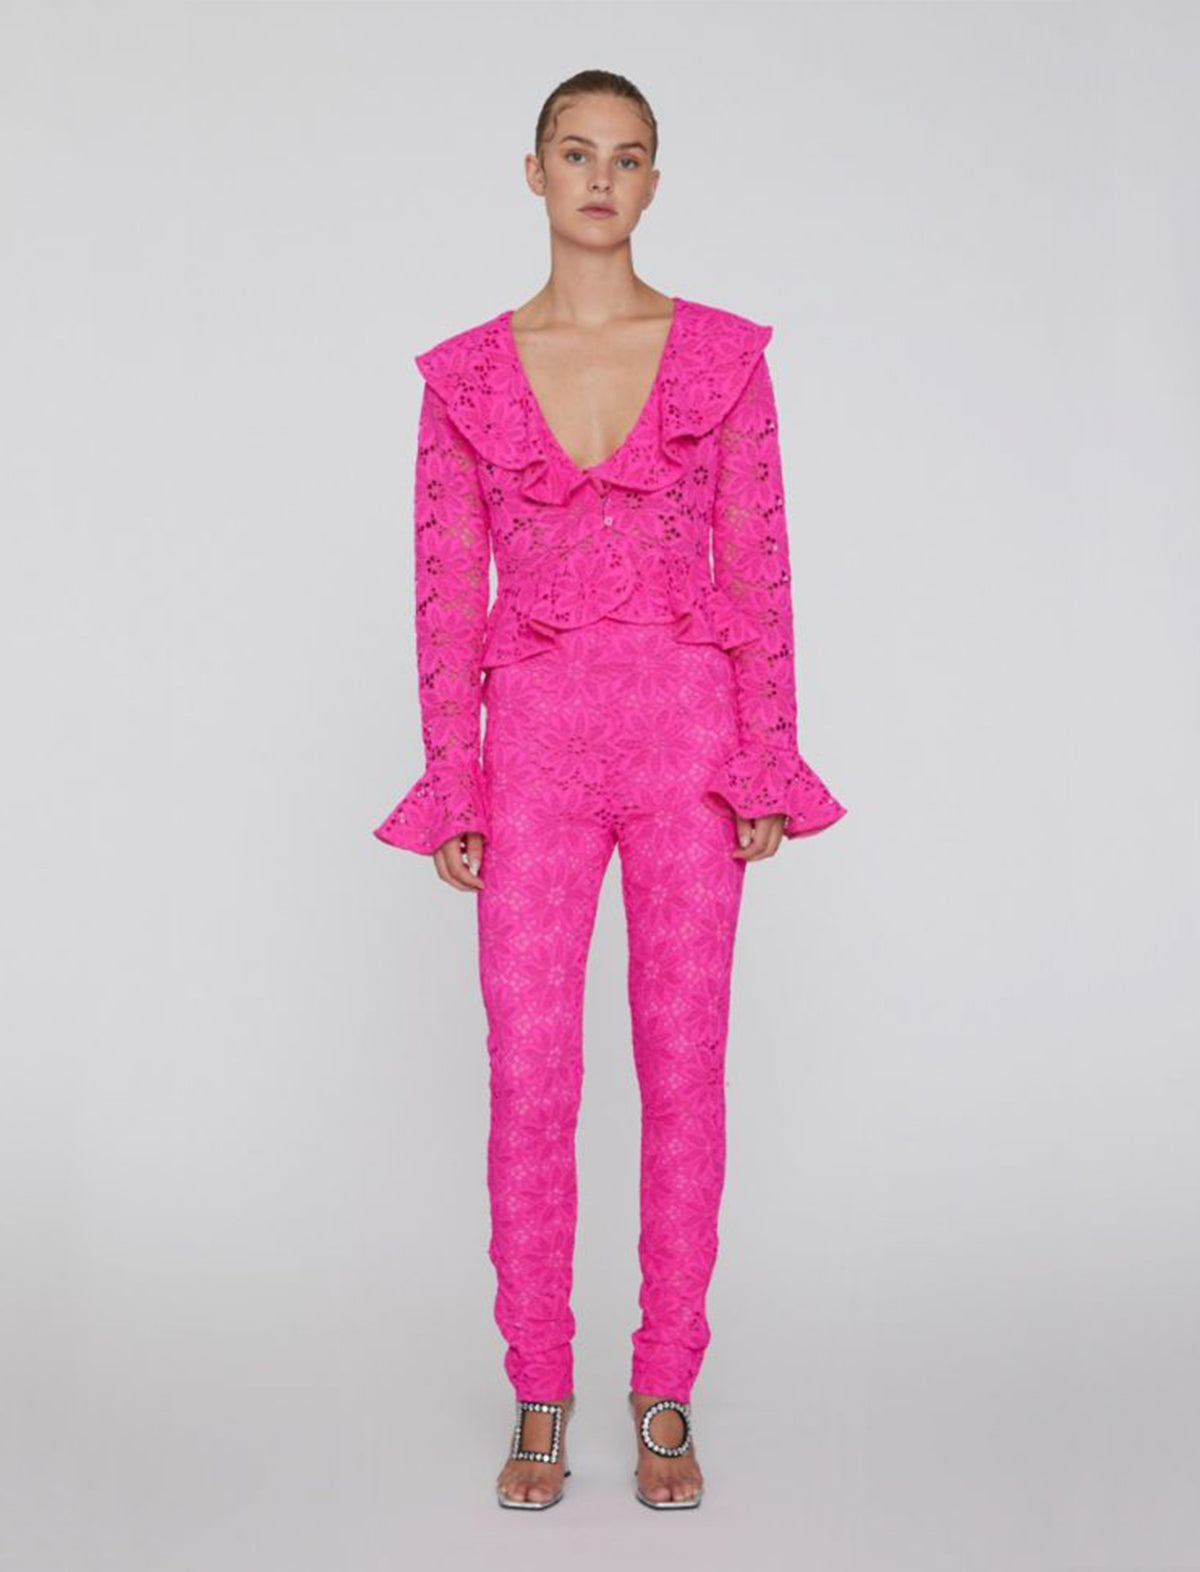 ROTATE Birger Christensen Heavy Lace High Rise Pants in Pink Glo